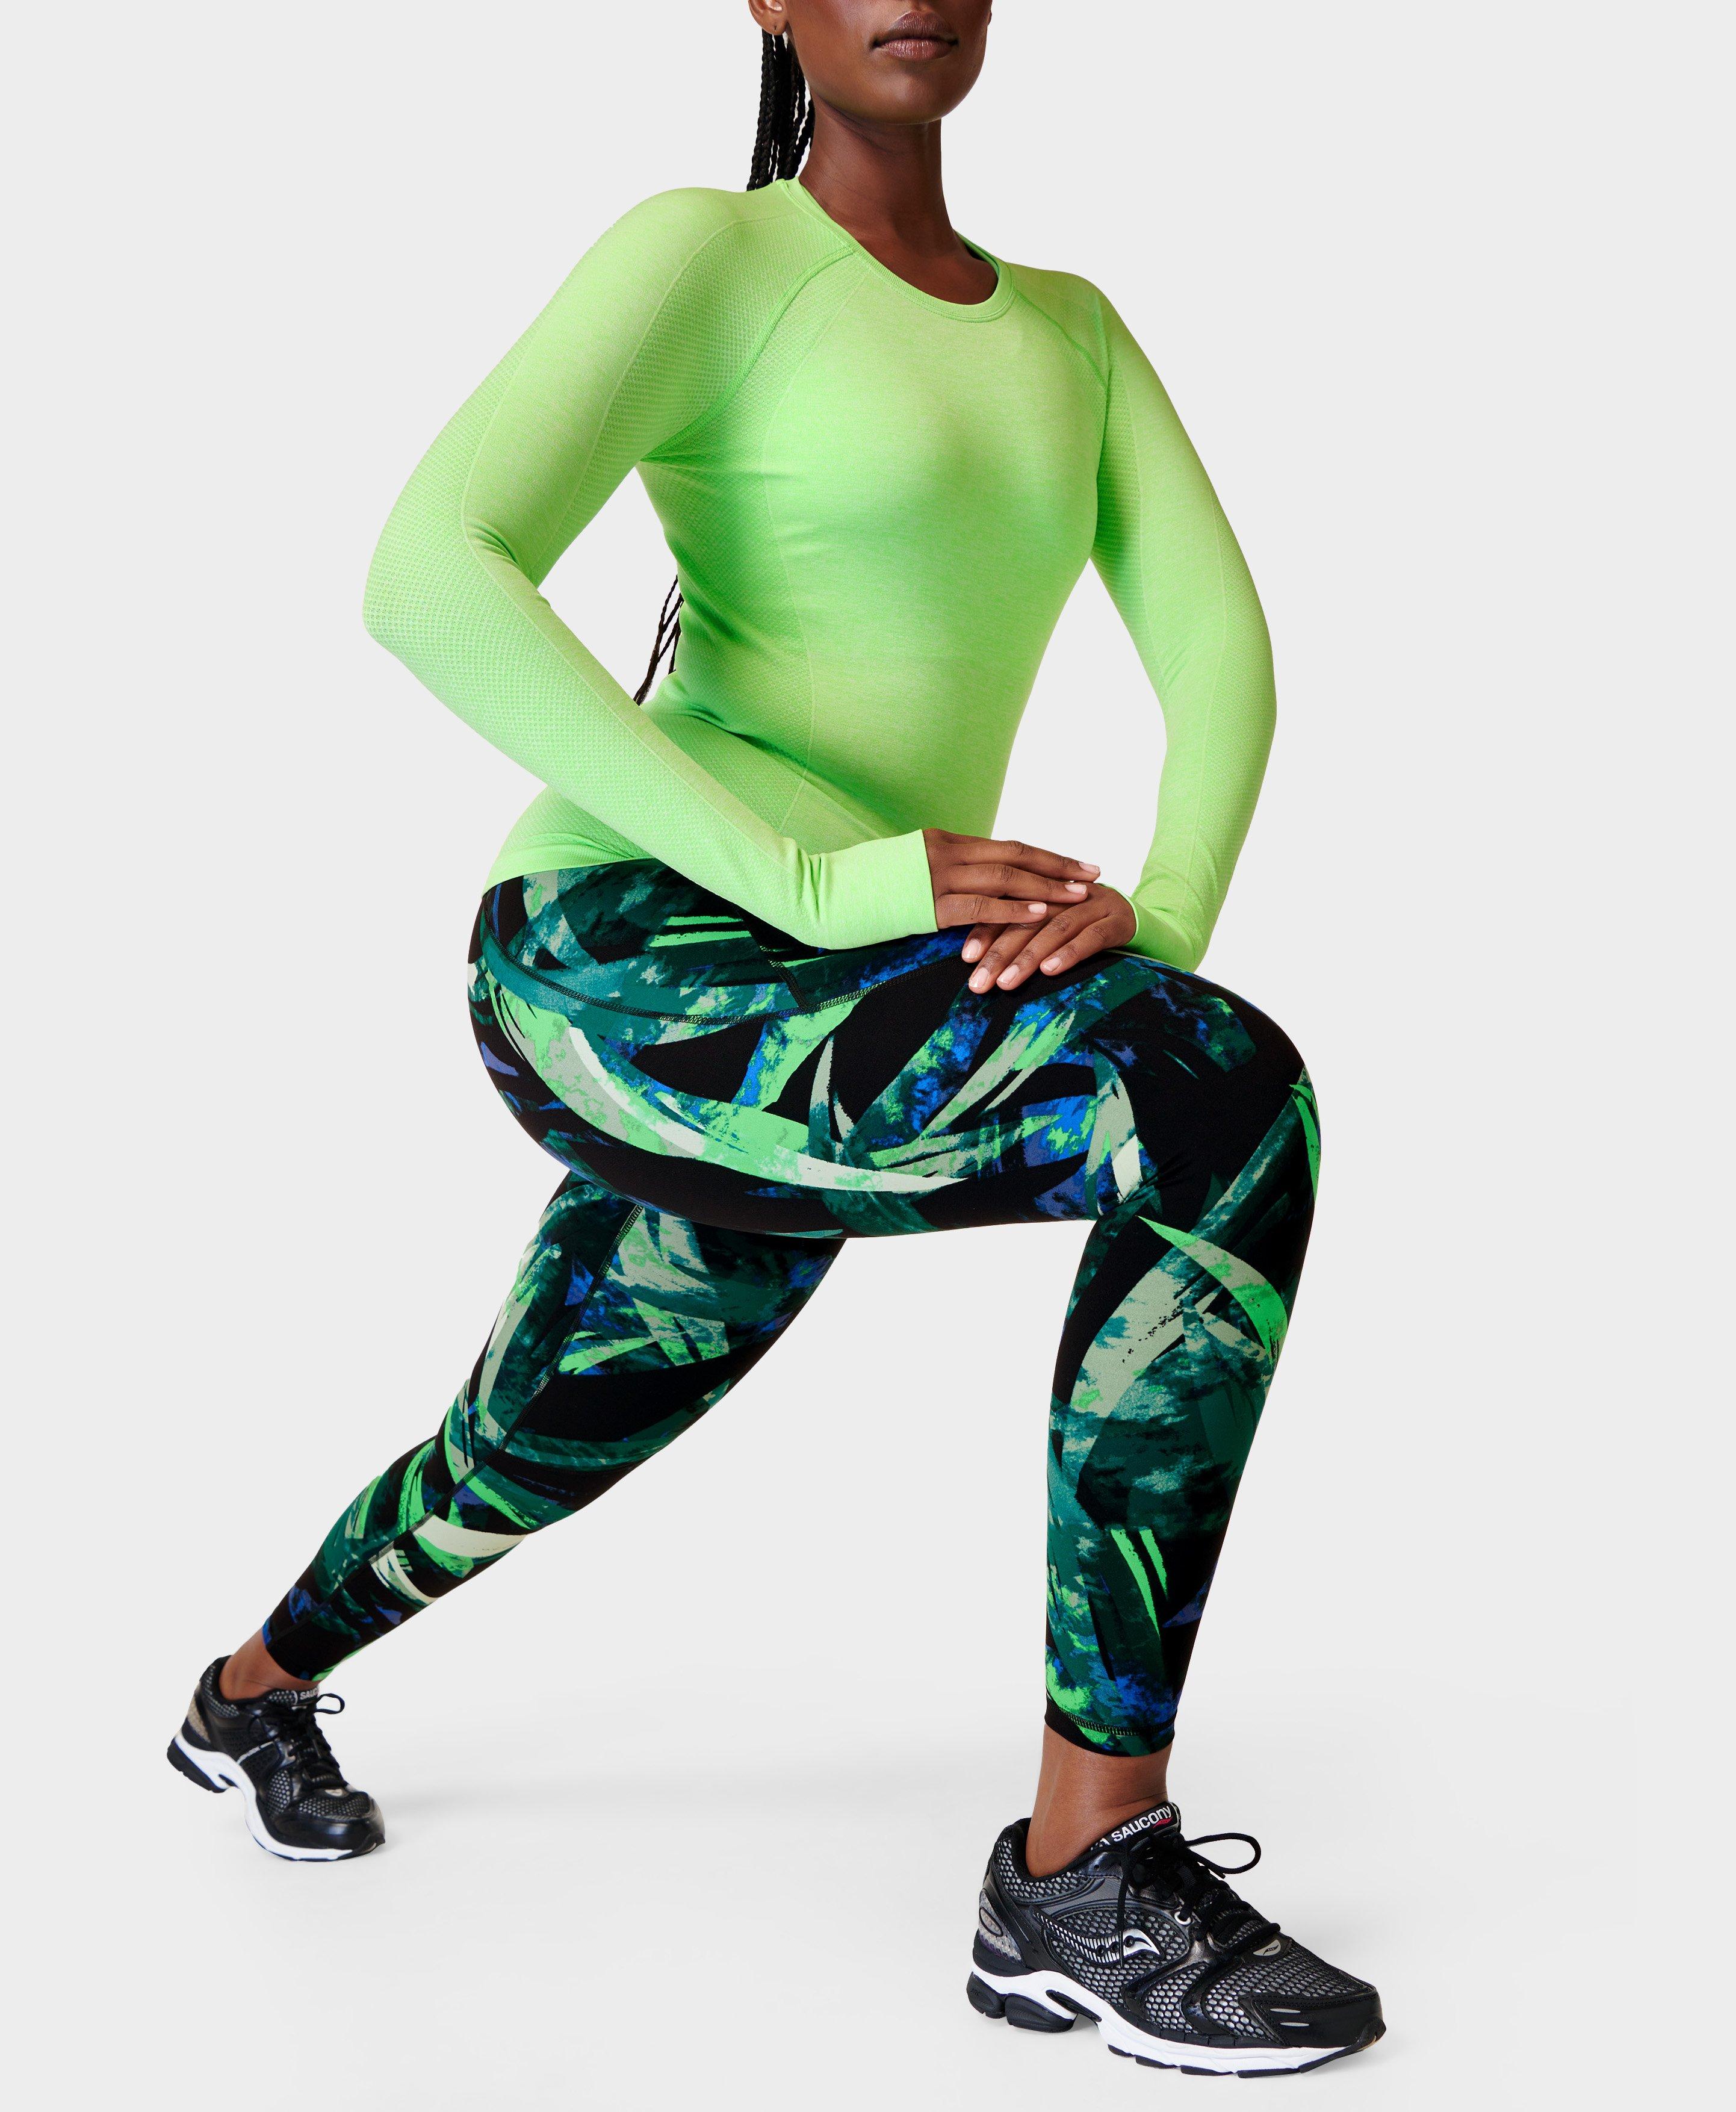 Nike Performance Yoga Clothes, Yoga Clothing, Free Delivery*